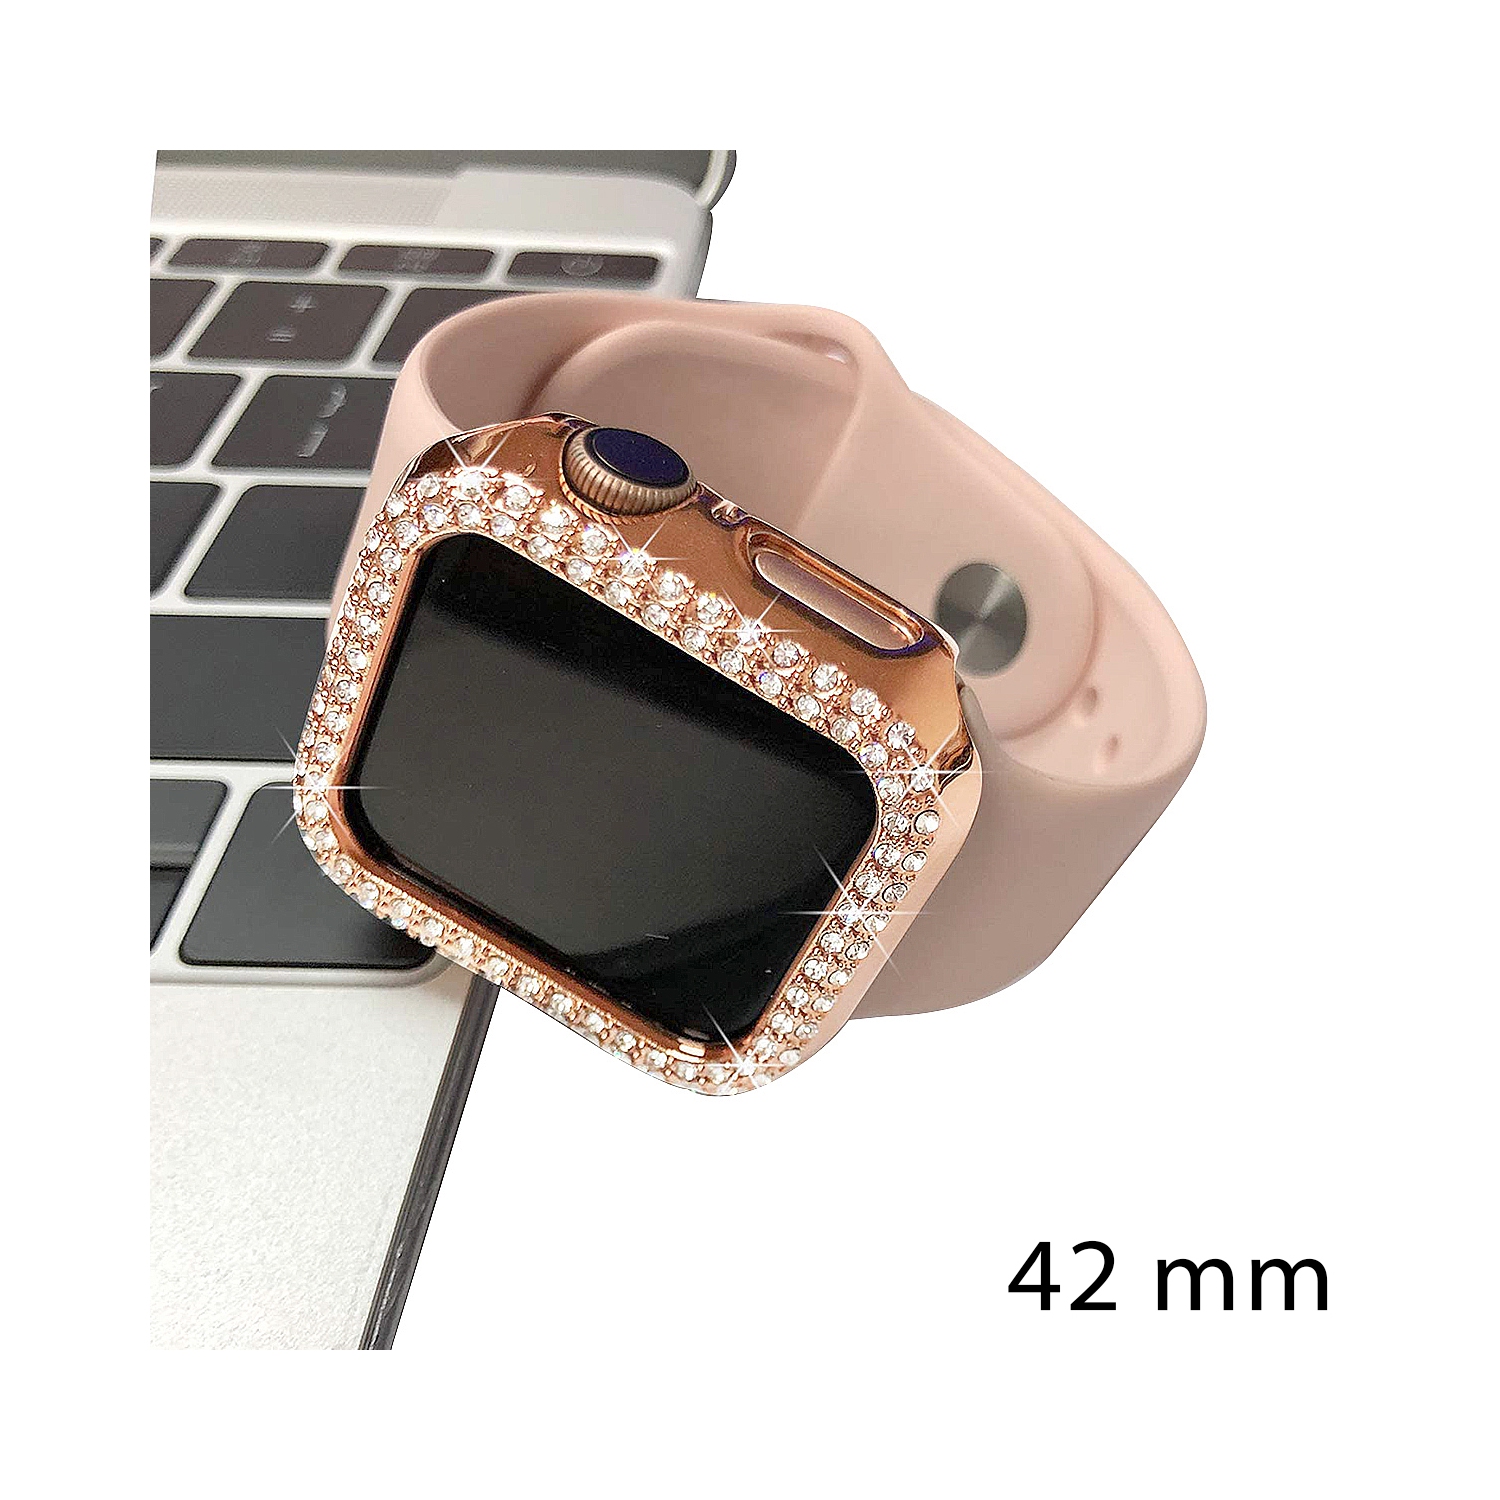 Crystal Diamond Design Bumper Case Body Protection Cover Watch Shell For Apple iWatch 42mm Series 1 / 2 / 3 - Rose Gold